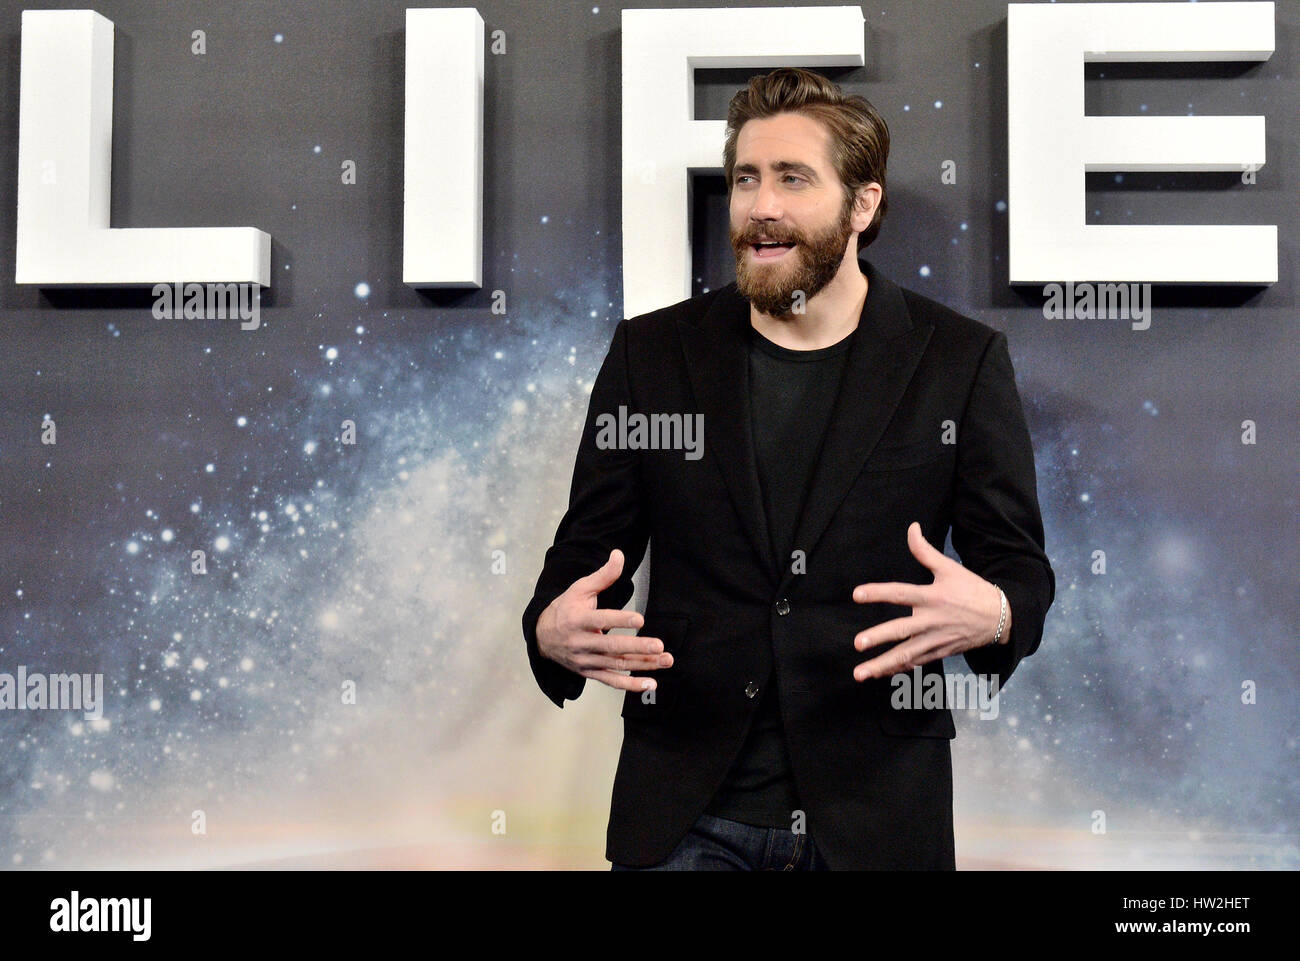 Jake Gyllenhaal attending the Life Photocall, held in the Court Room at The Corinthia Hotel, London. PRESS ASSOCIATION Photo. Picture date: Thursday 16th March, 2016. Photo credit should read: Victoria Jones/PA Wire Stock Photo